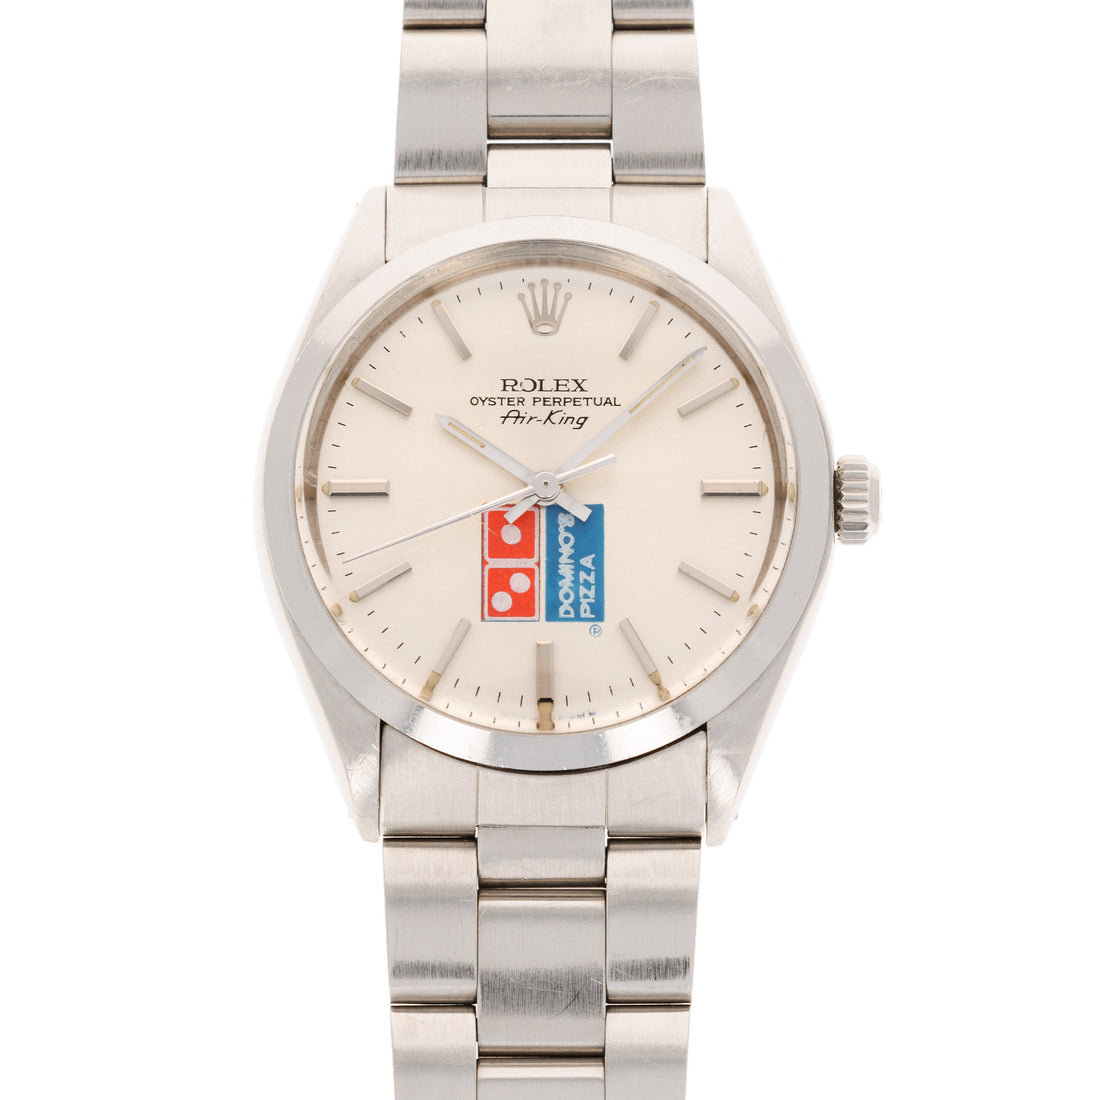 Rolex Steel Dominos Air-King Ref. 5500 with Papers